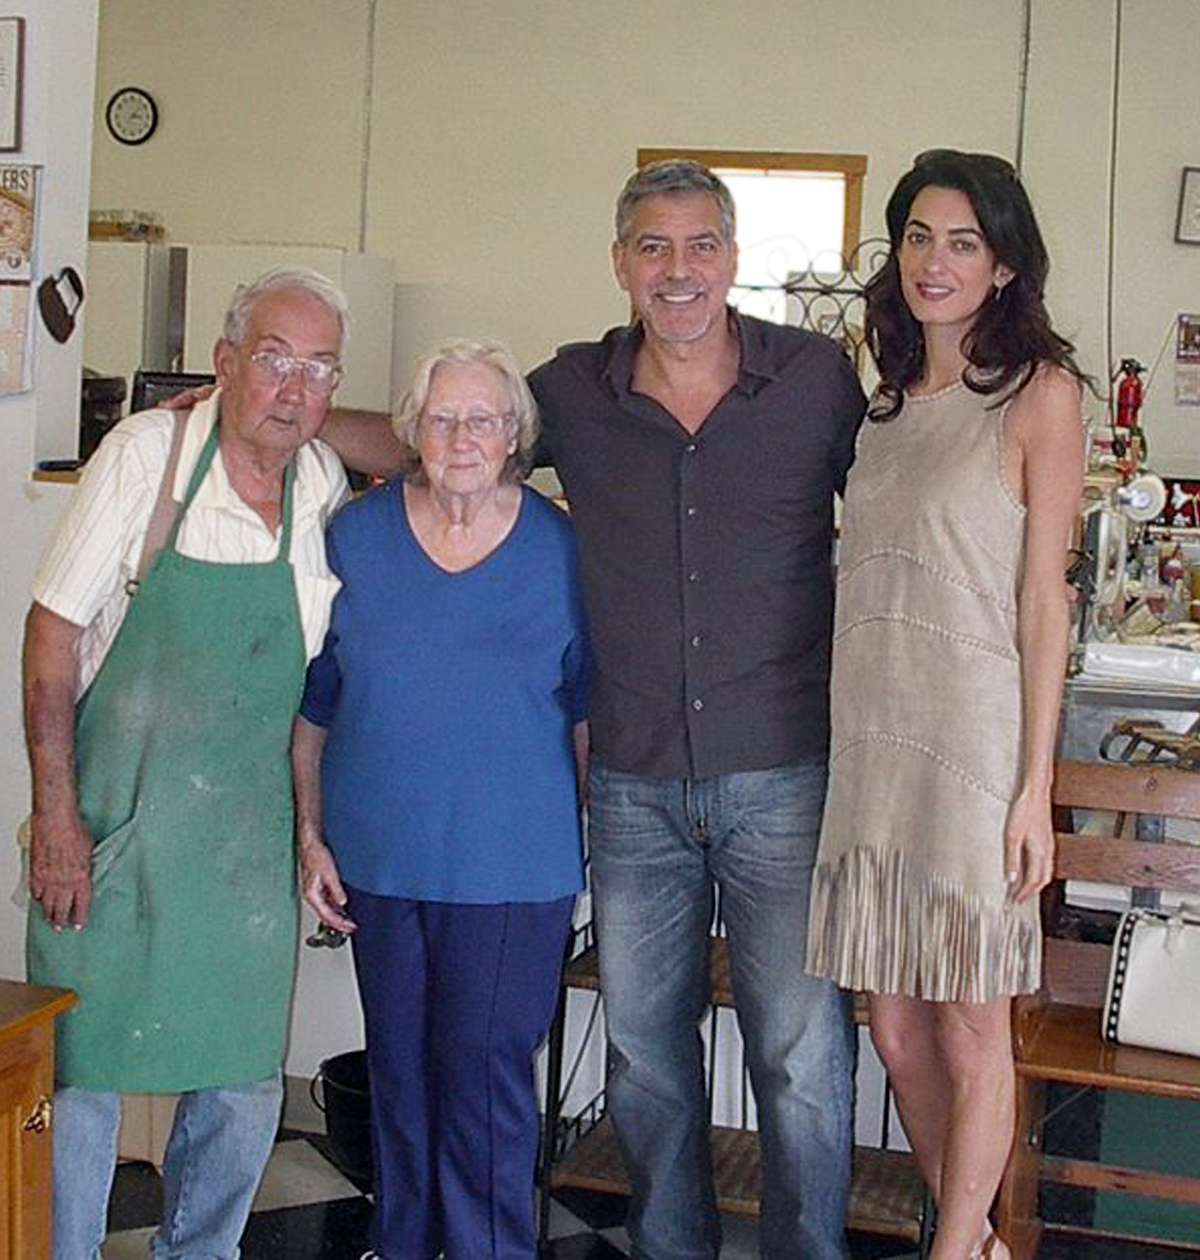 George Clooney takes Amal back to his hometown for a slice of 'Transparent Pie'